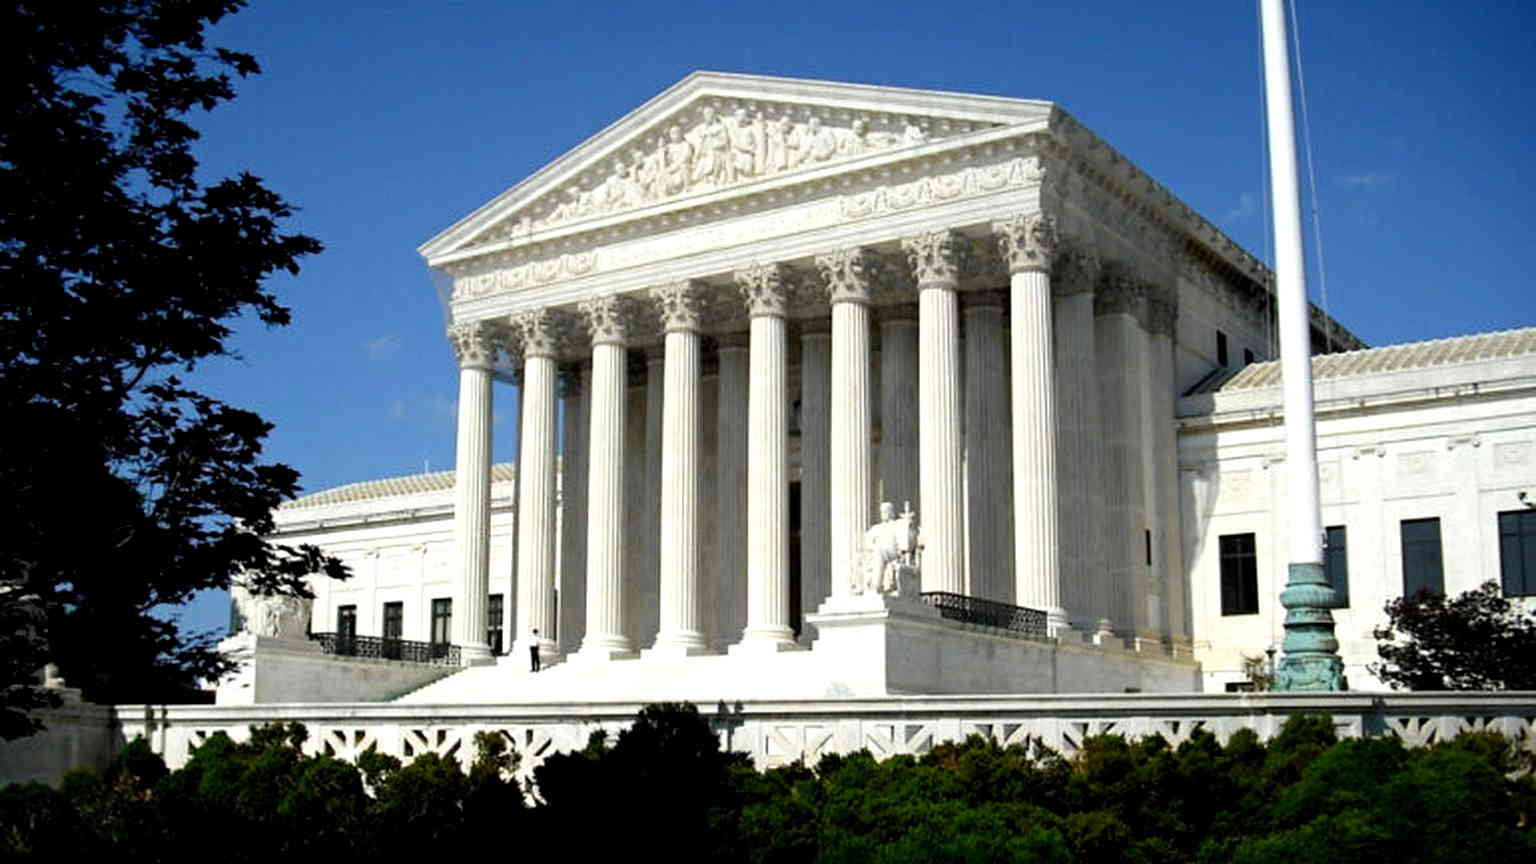 Supreme Court kills affirmative action in college admissions